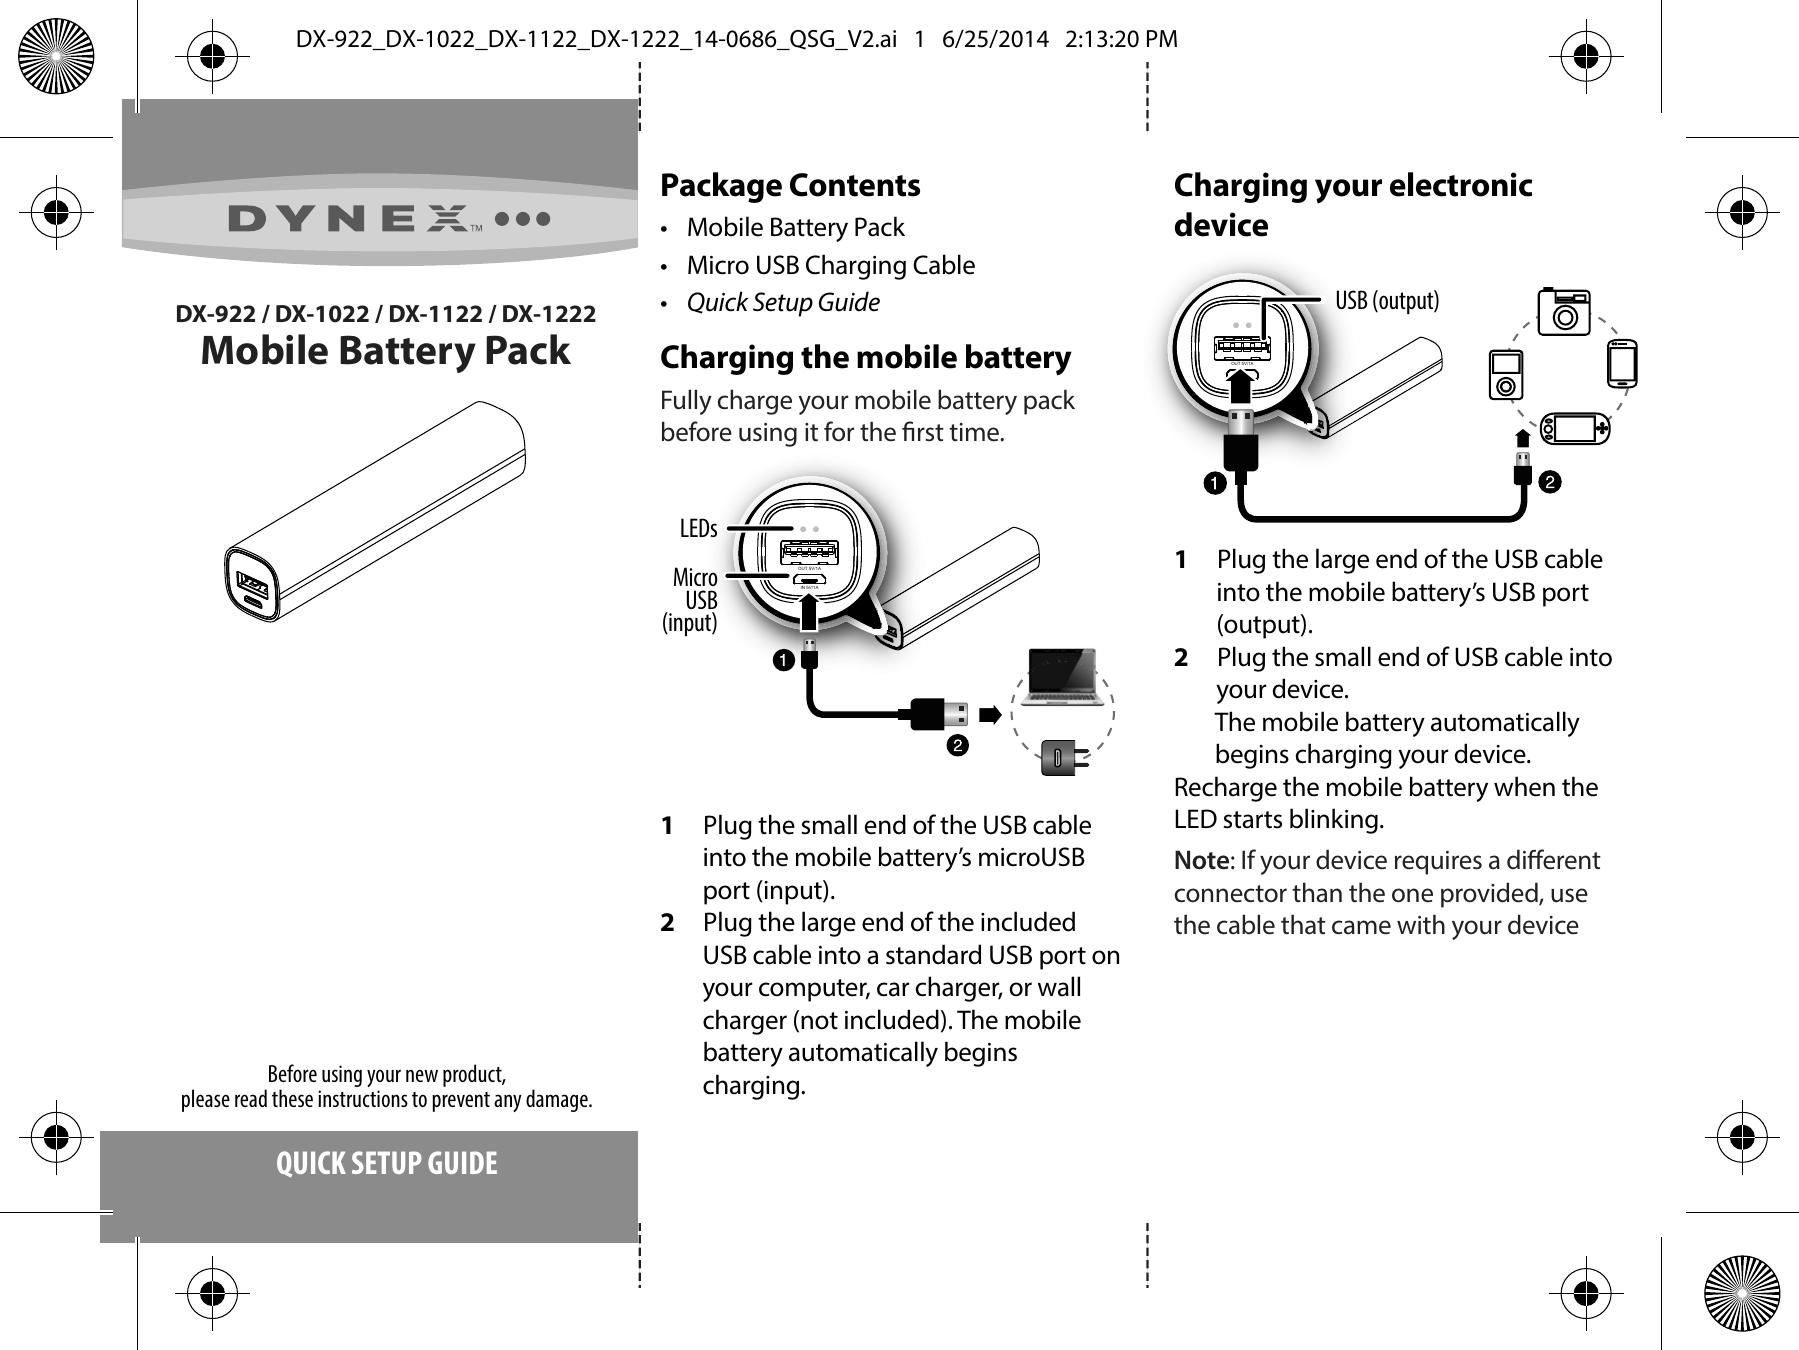 Dynex DX-1022 Marine Battery User Manual (Page 1)